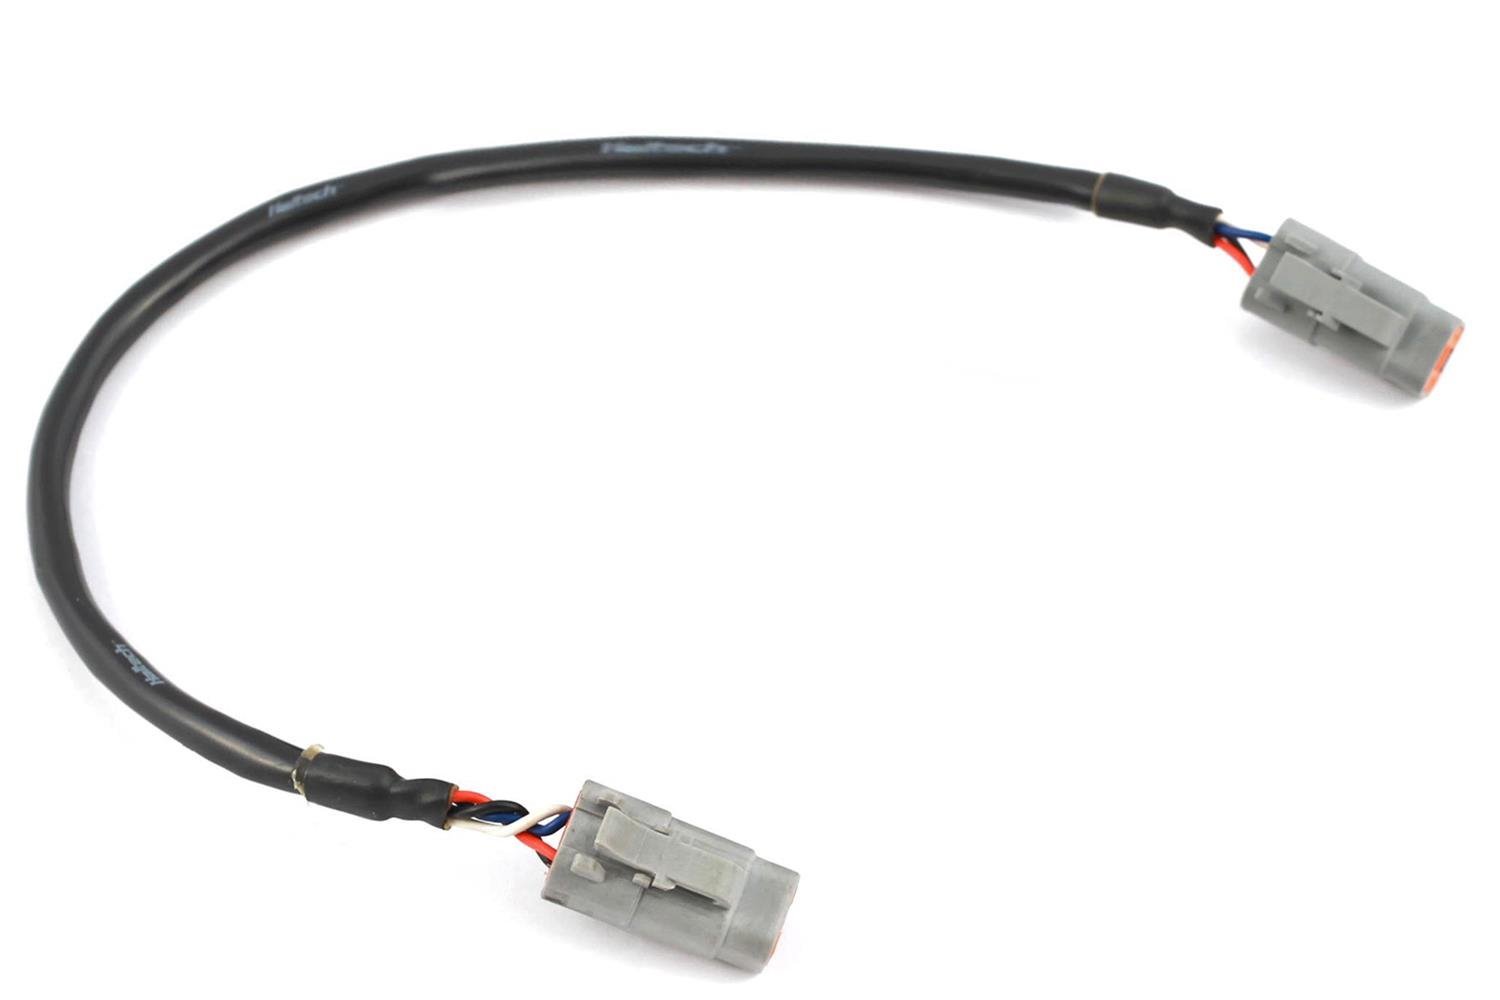 HT-130026 Elite CAN Cable, DTM-4 to DTM-4, 1800 mm (72 in.)